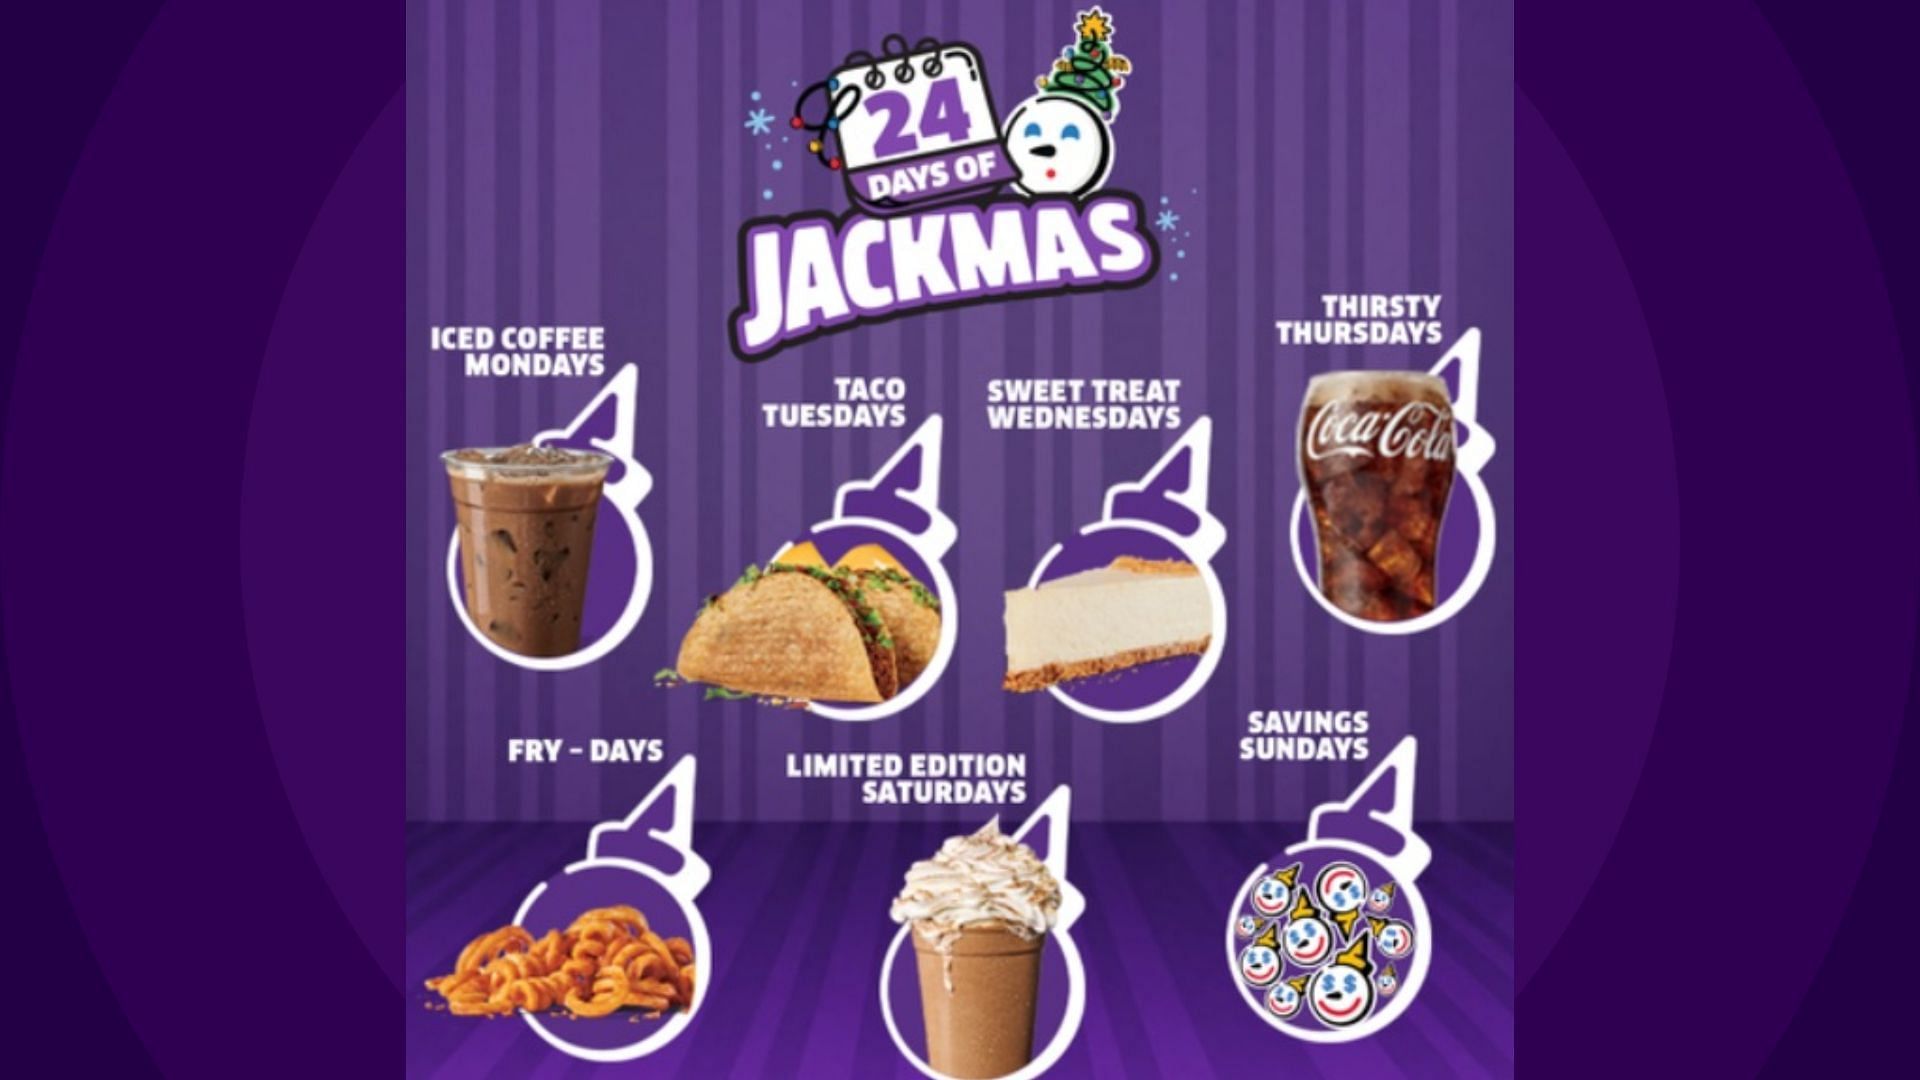 Promotional image for 24 Days of Jackmas (Image via Jack in the Box)